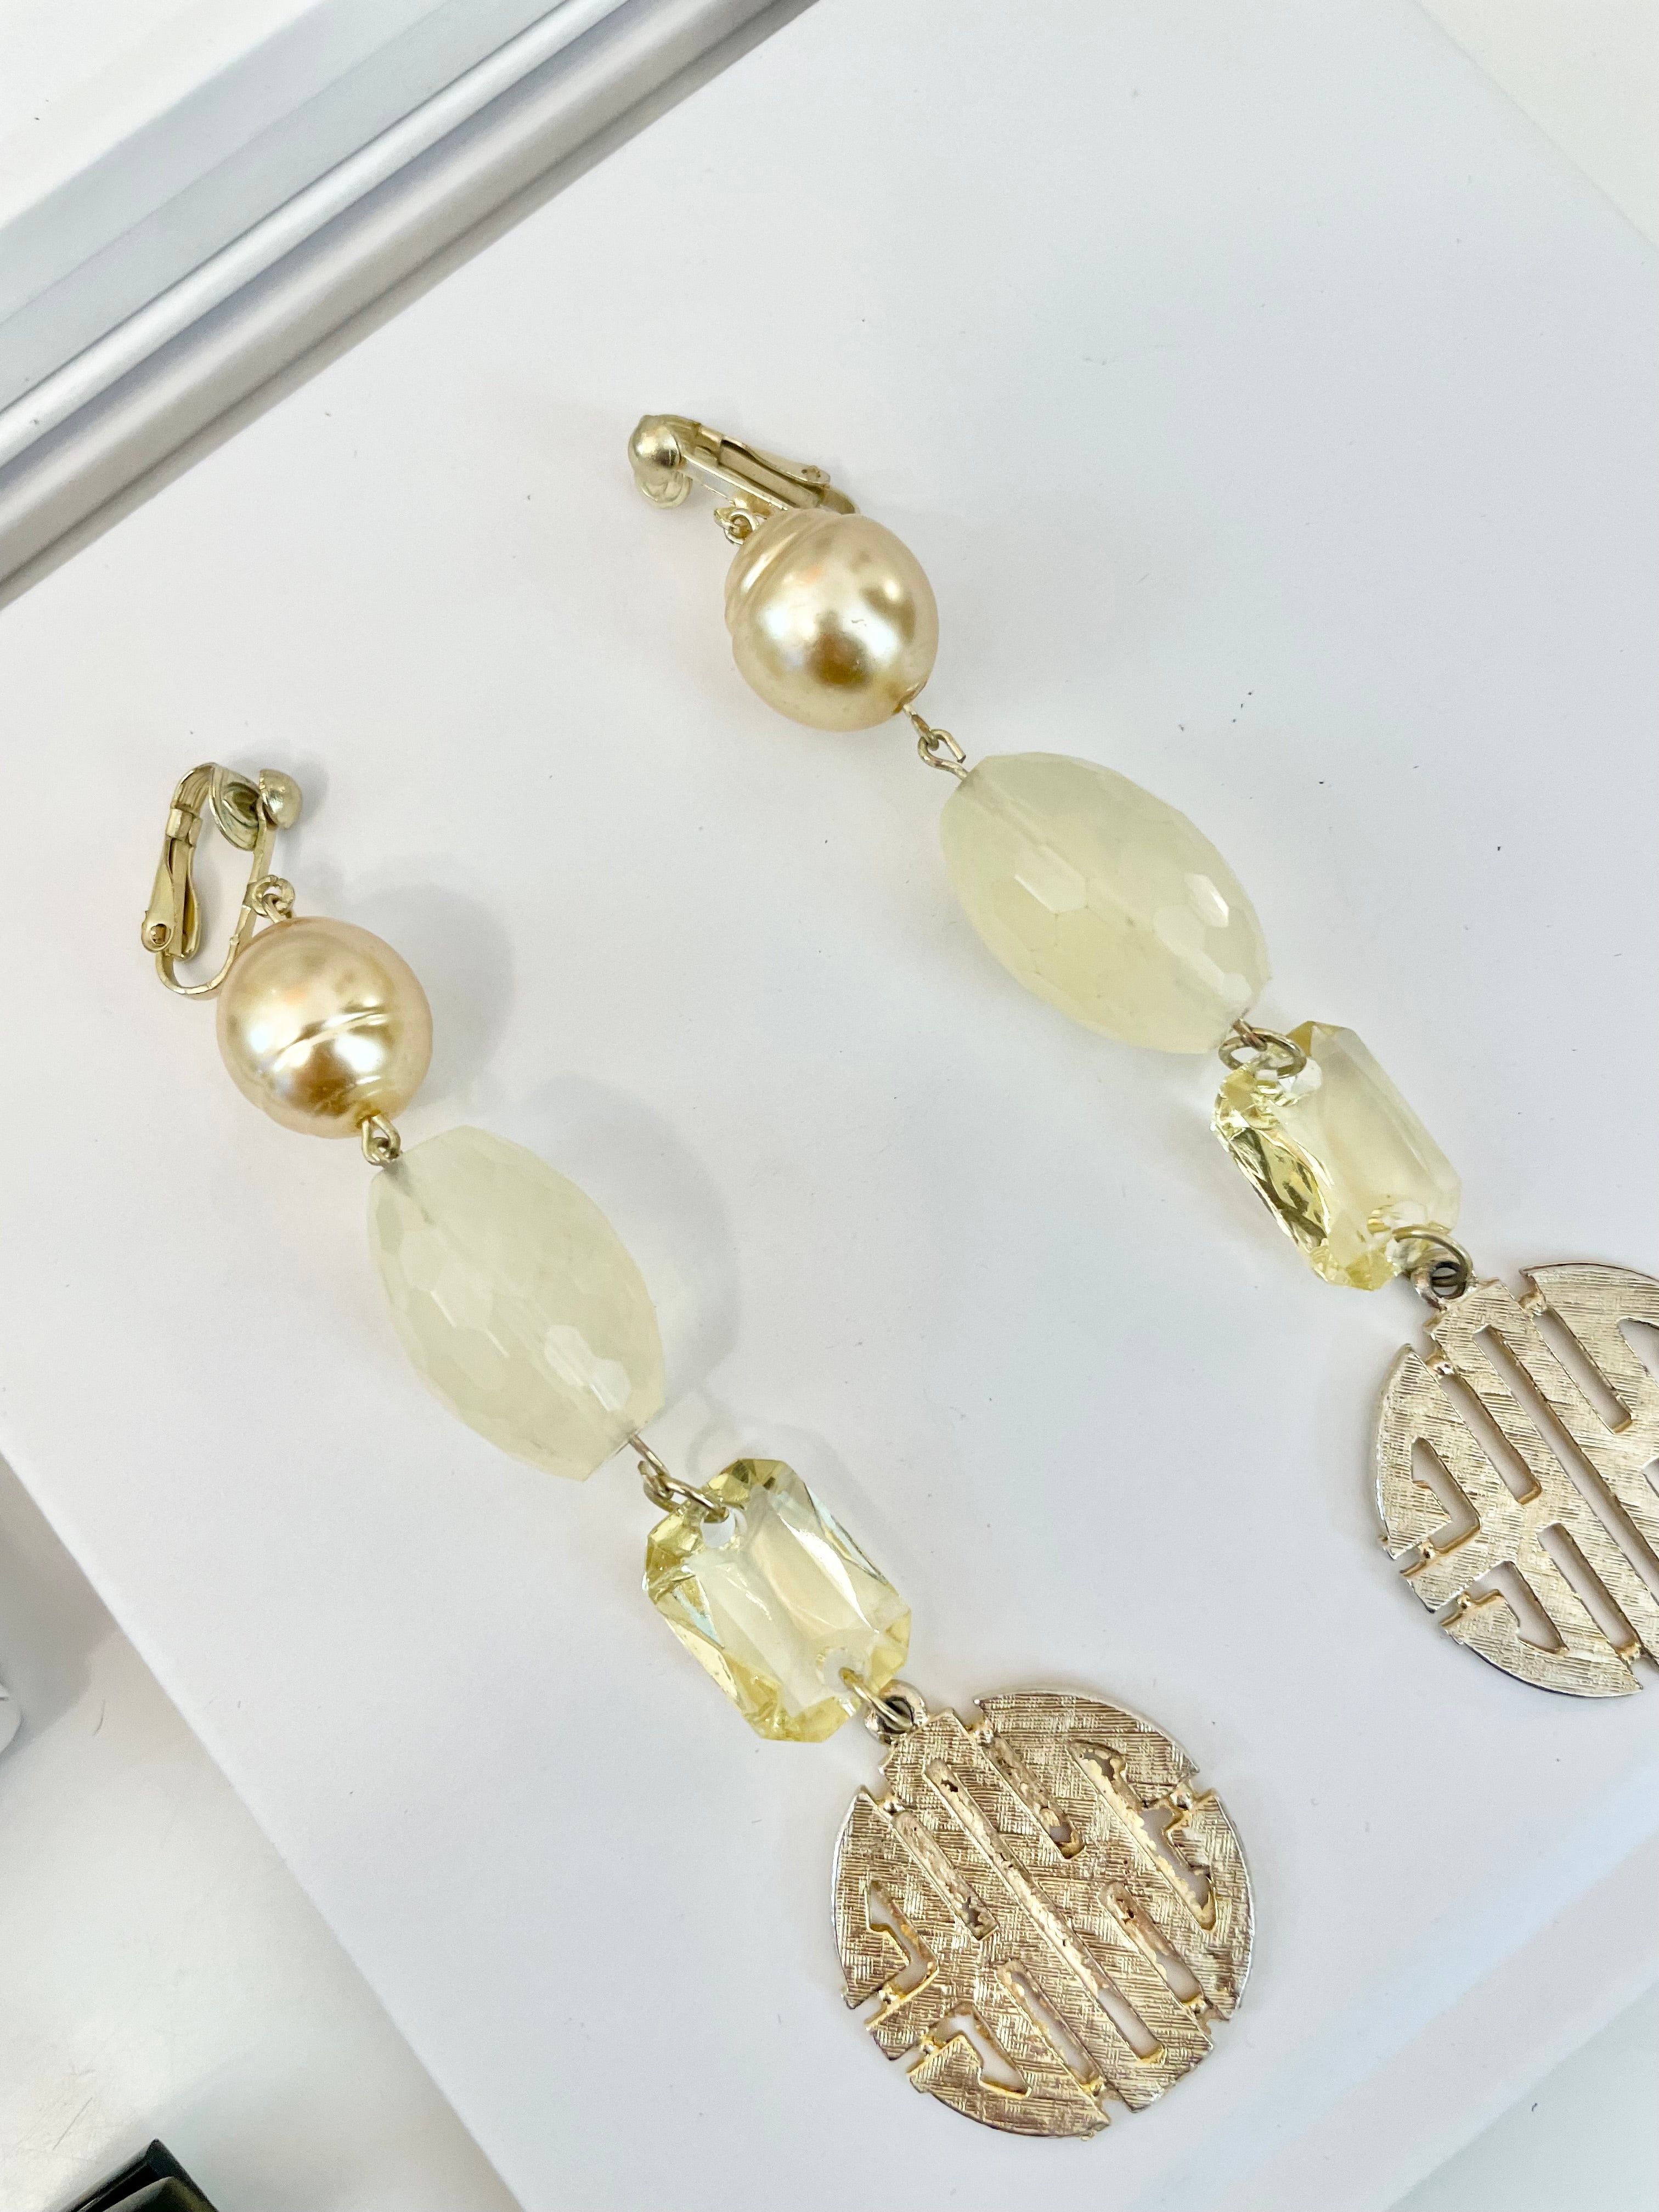 Vintage showstopper earrings... so divine! Lemon and pearls..Oh my